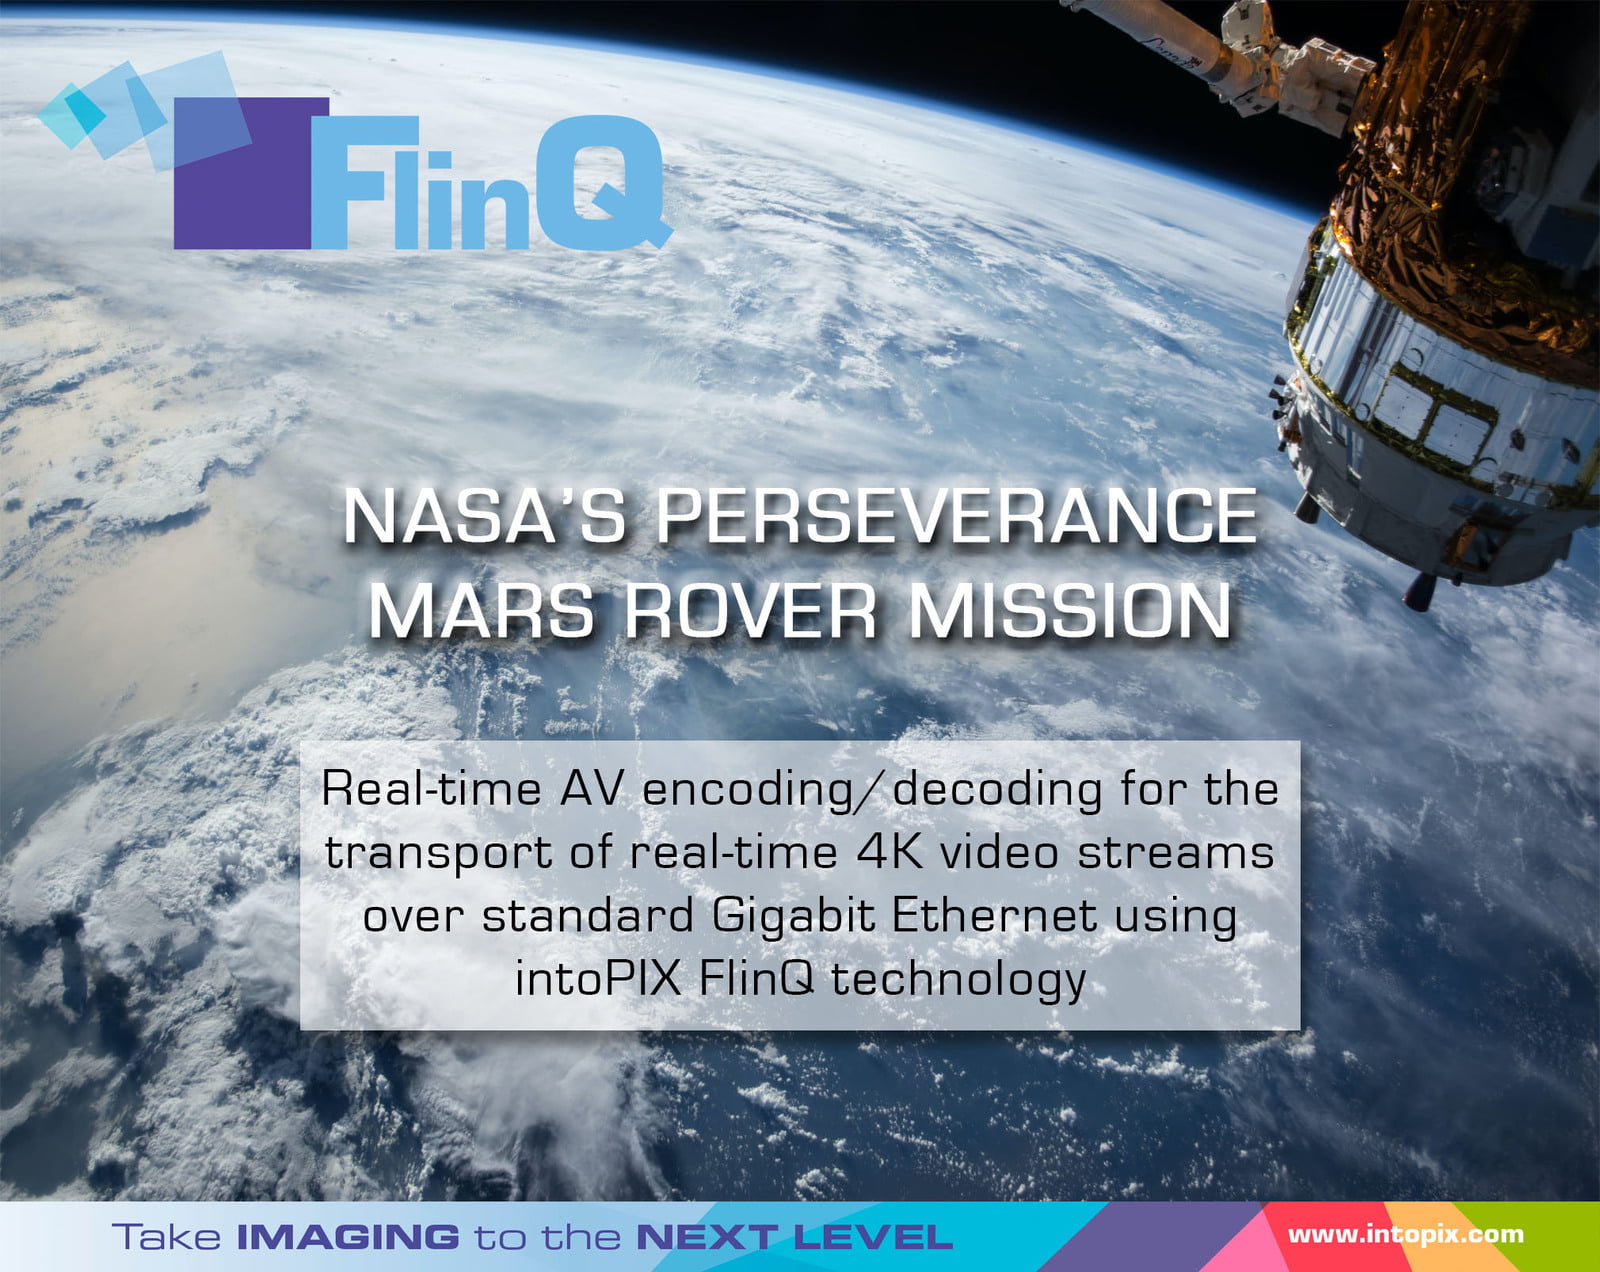 intoPIX FlinQ technology embedded in Crestron DM NVX at the service of NASA 